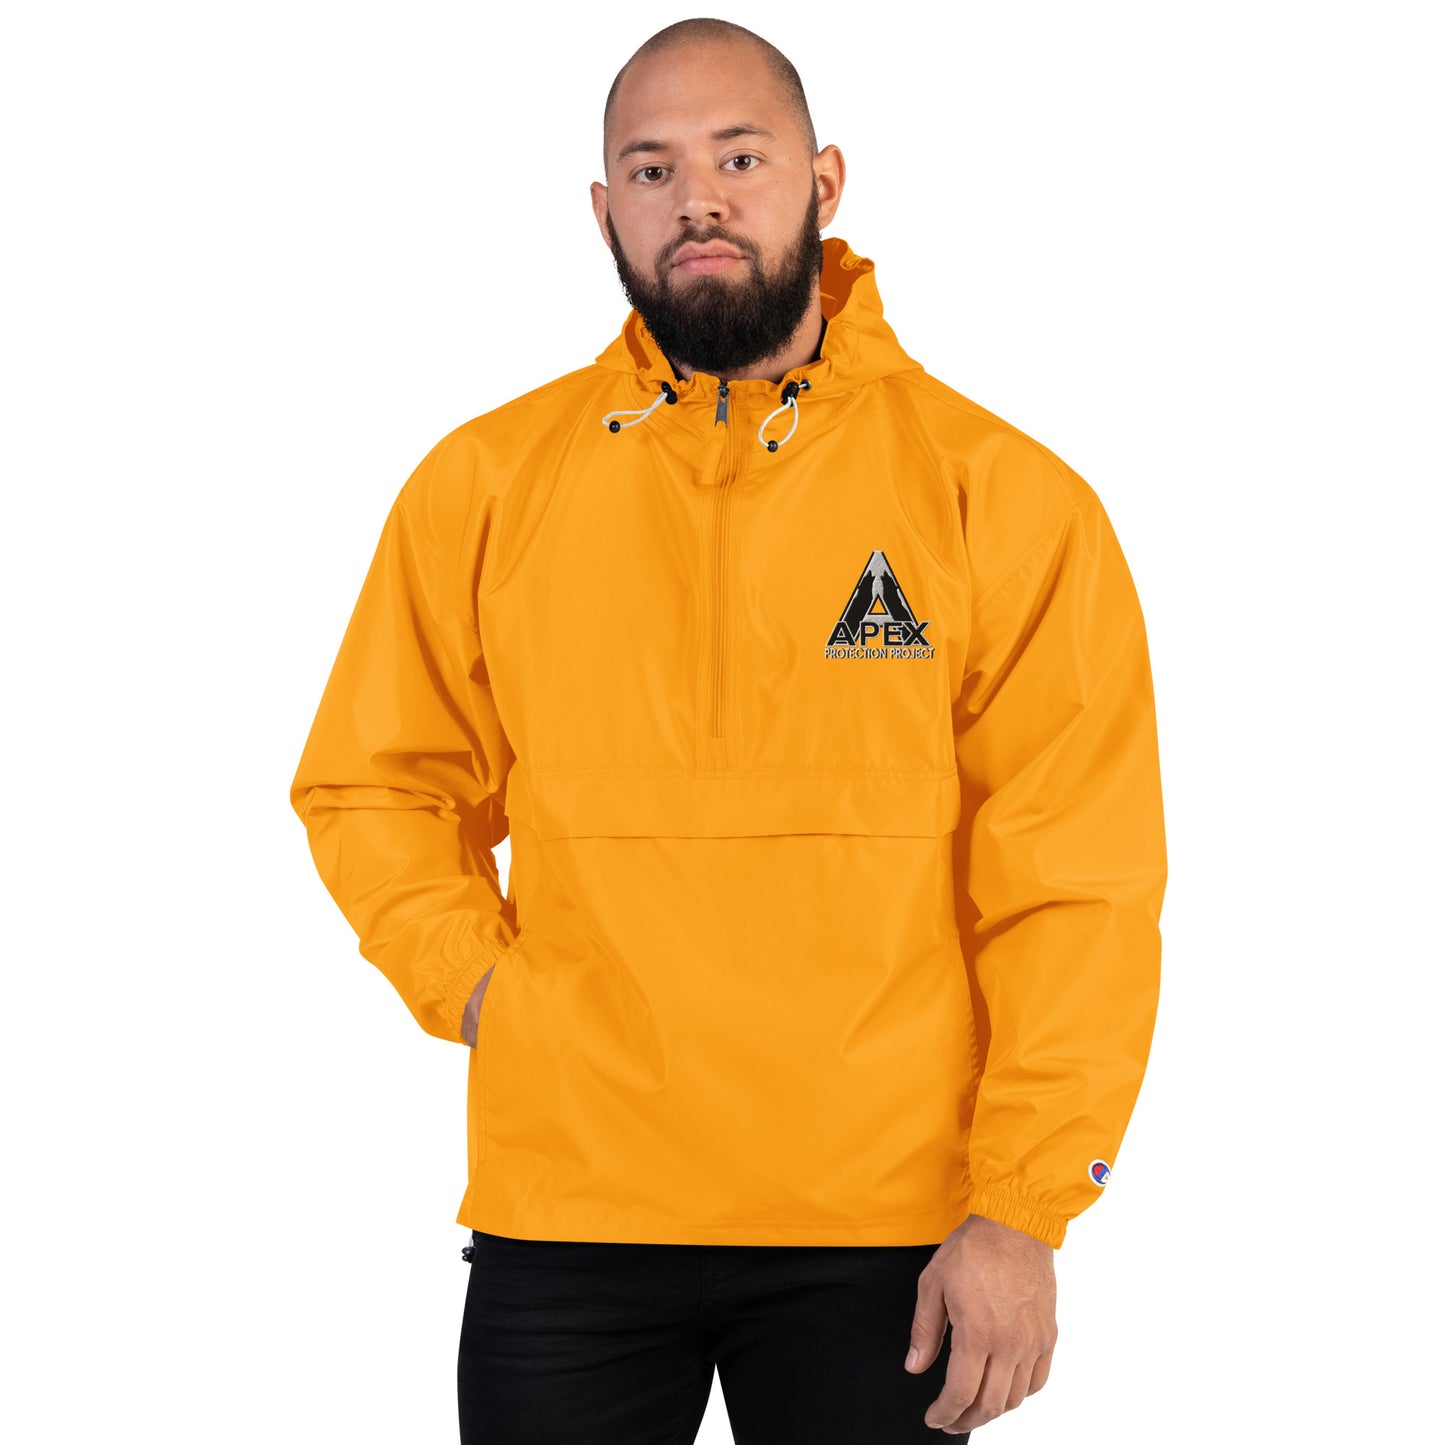 Apex Embroidered Champion Packable Jacket